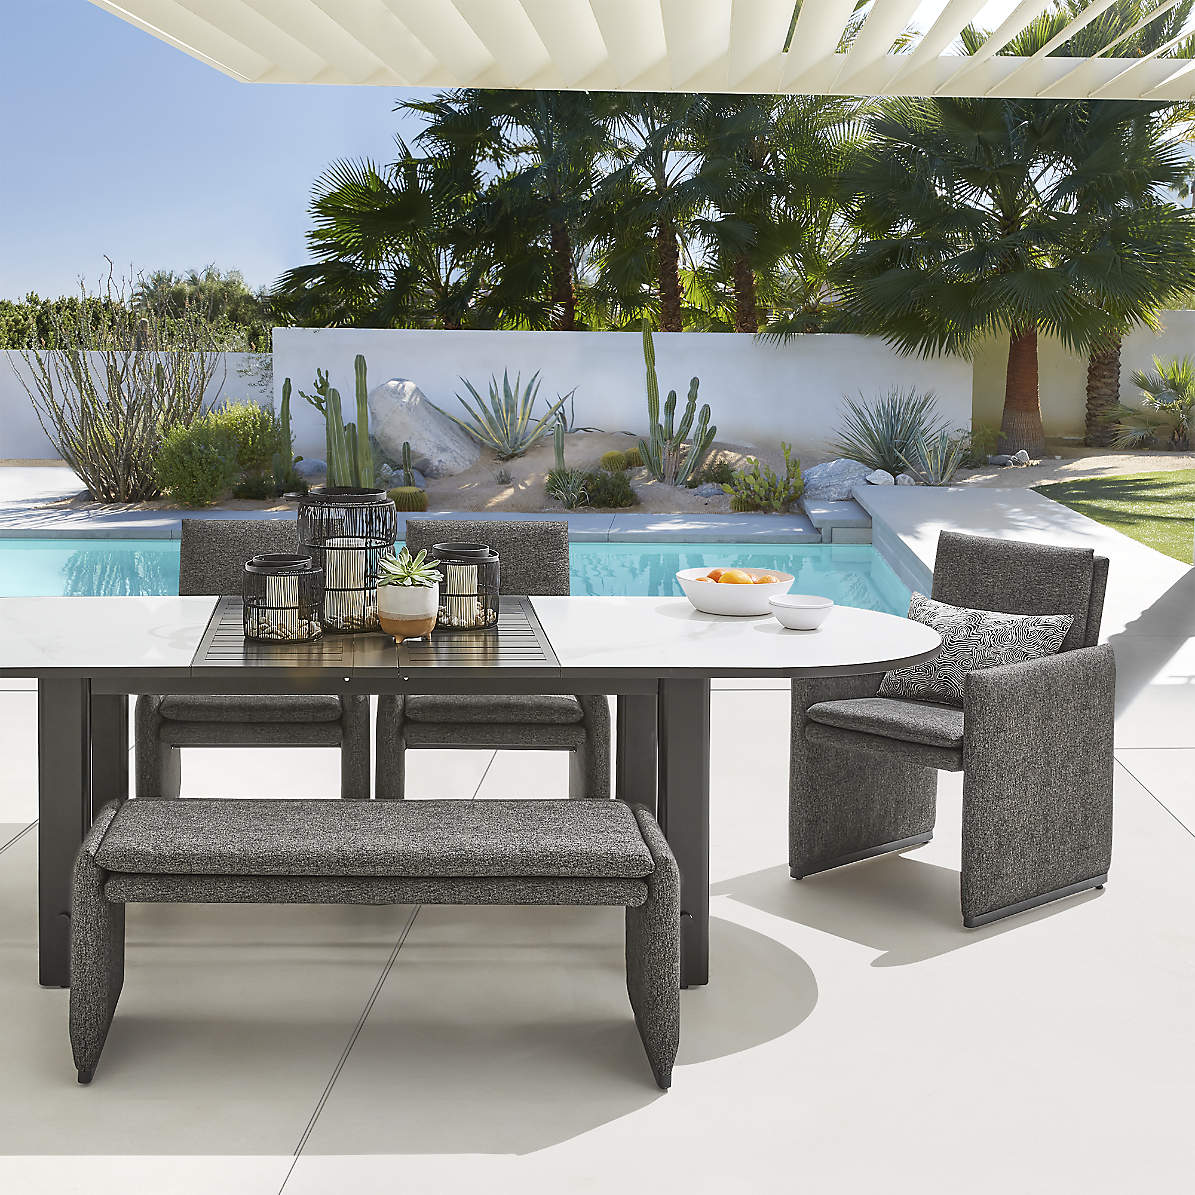 Zuma Expandable Outdoor Patio Dining, Patio Dining Table With Umbrella Hole Canada